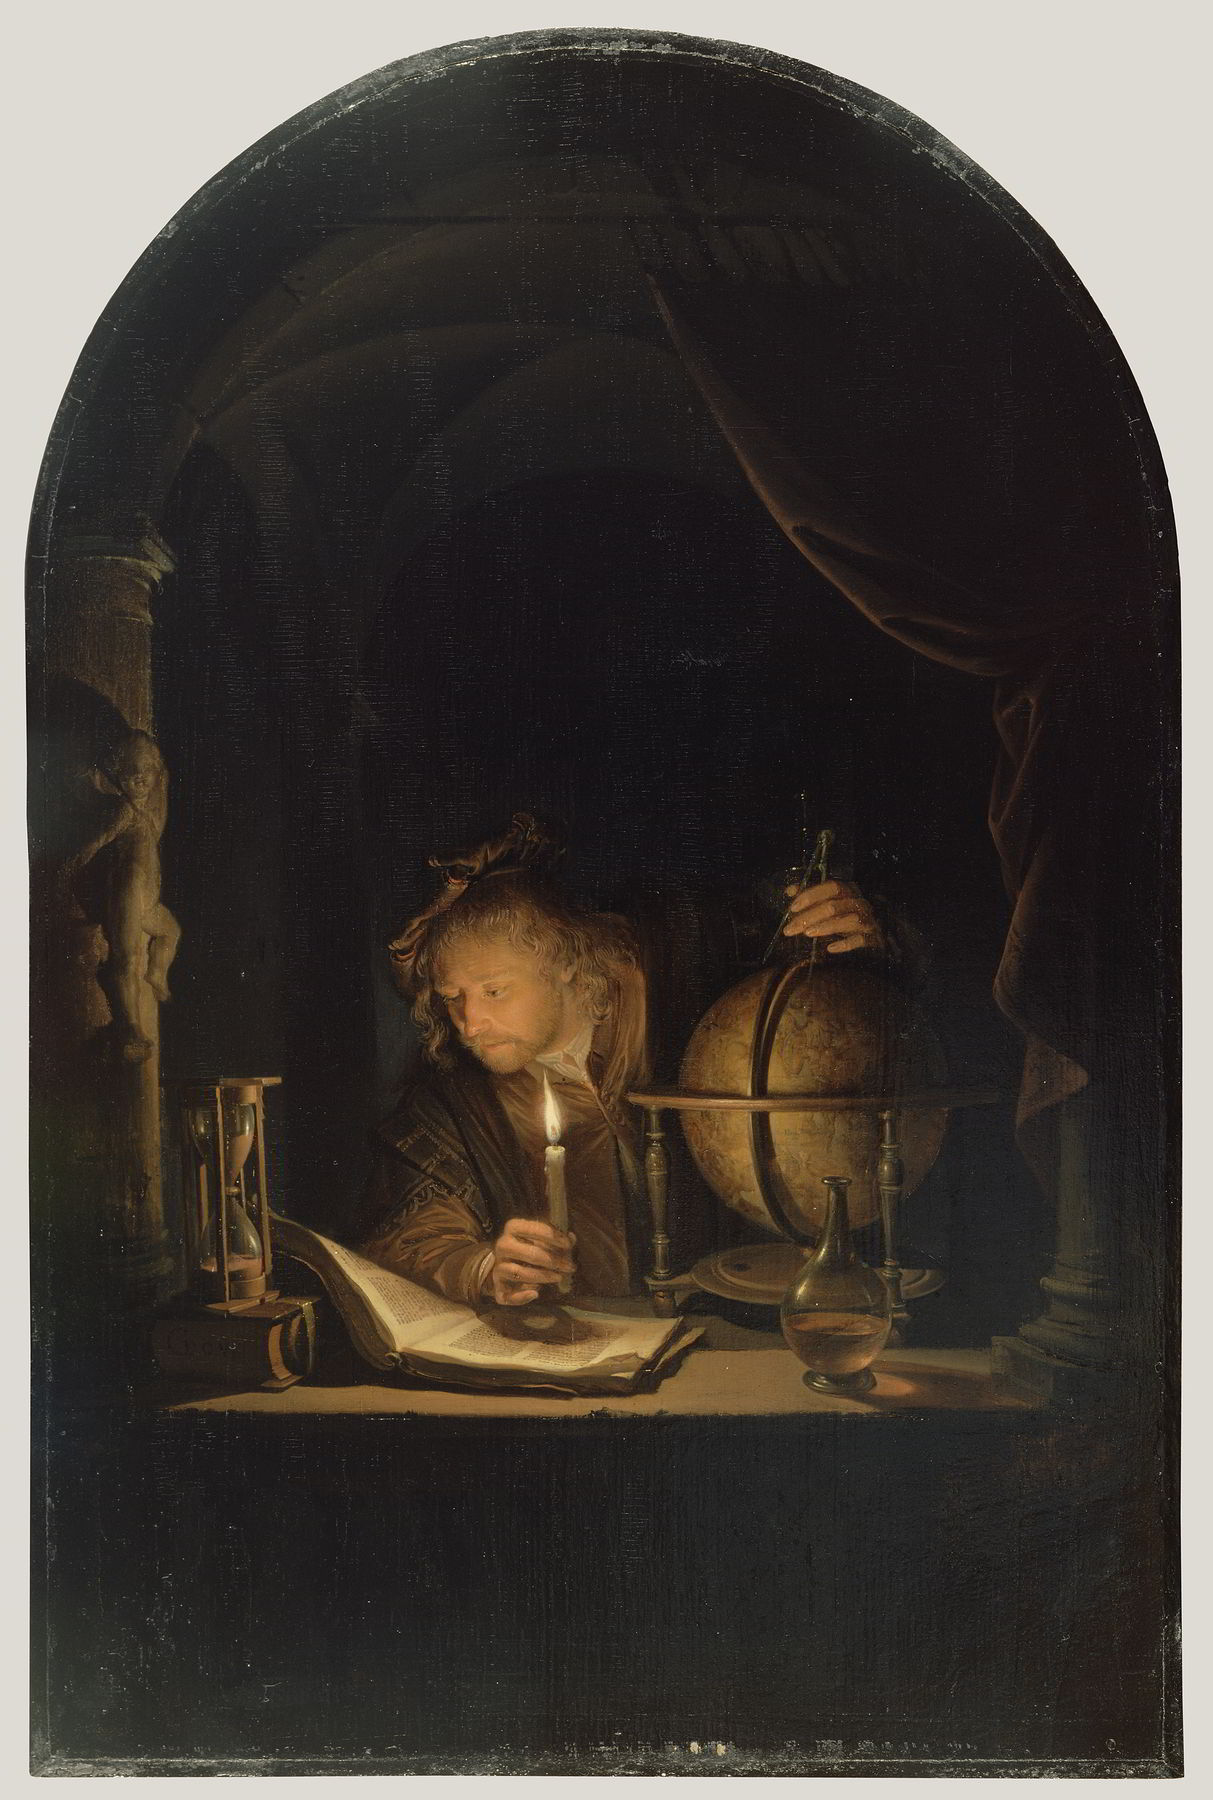 The Astronomer by Candlelight by Gerrit Dou